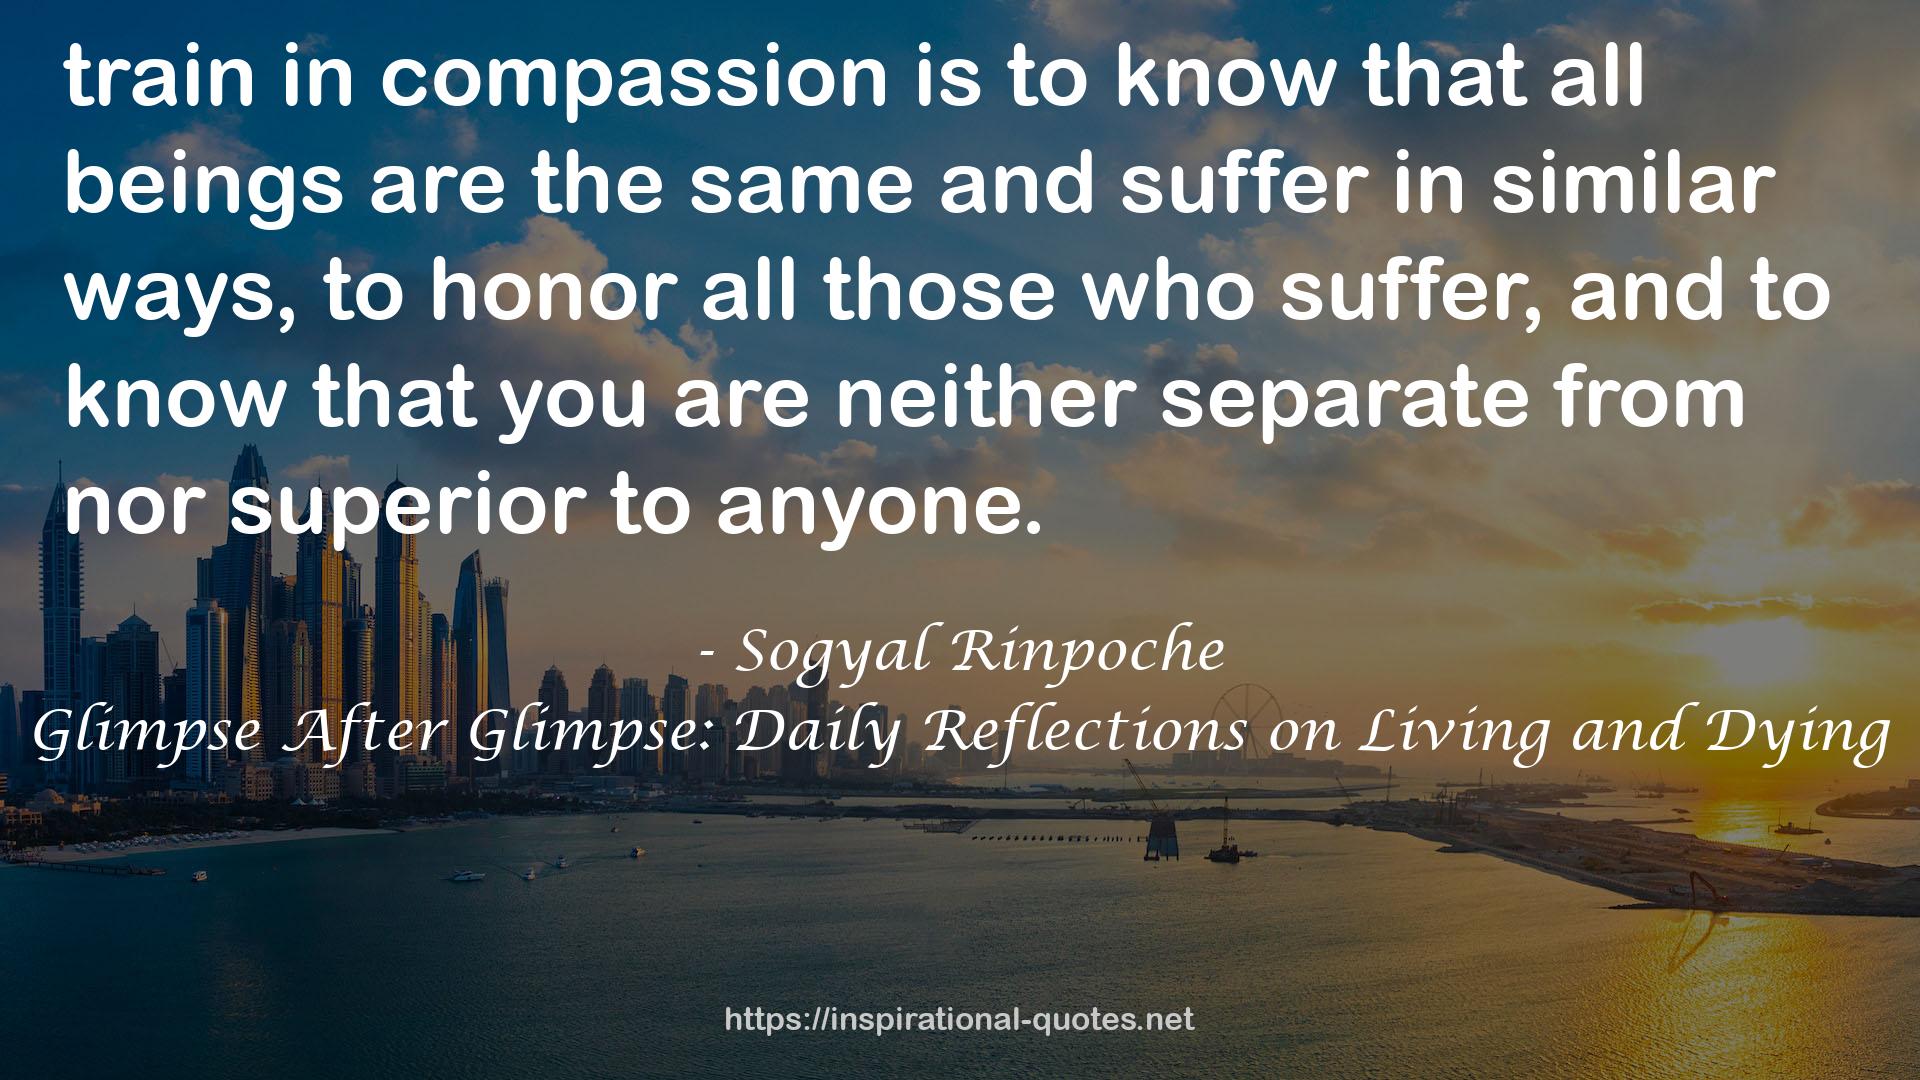 Glimpse After Glimpse: Daily Reflections on Living and Dying QUOTES